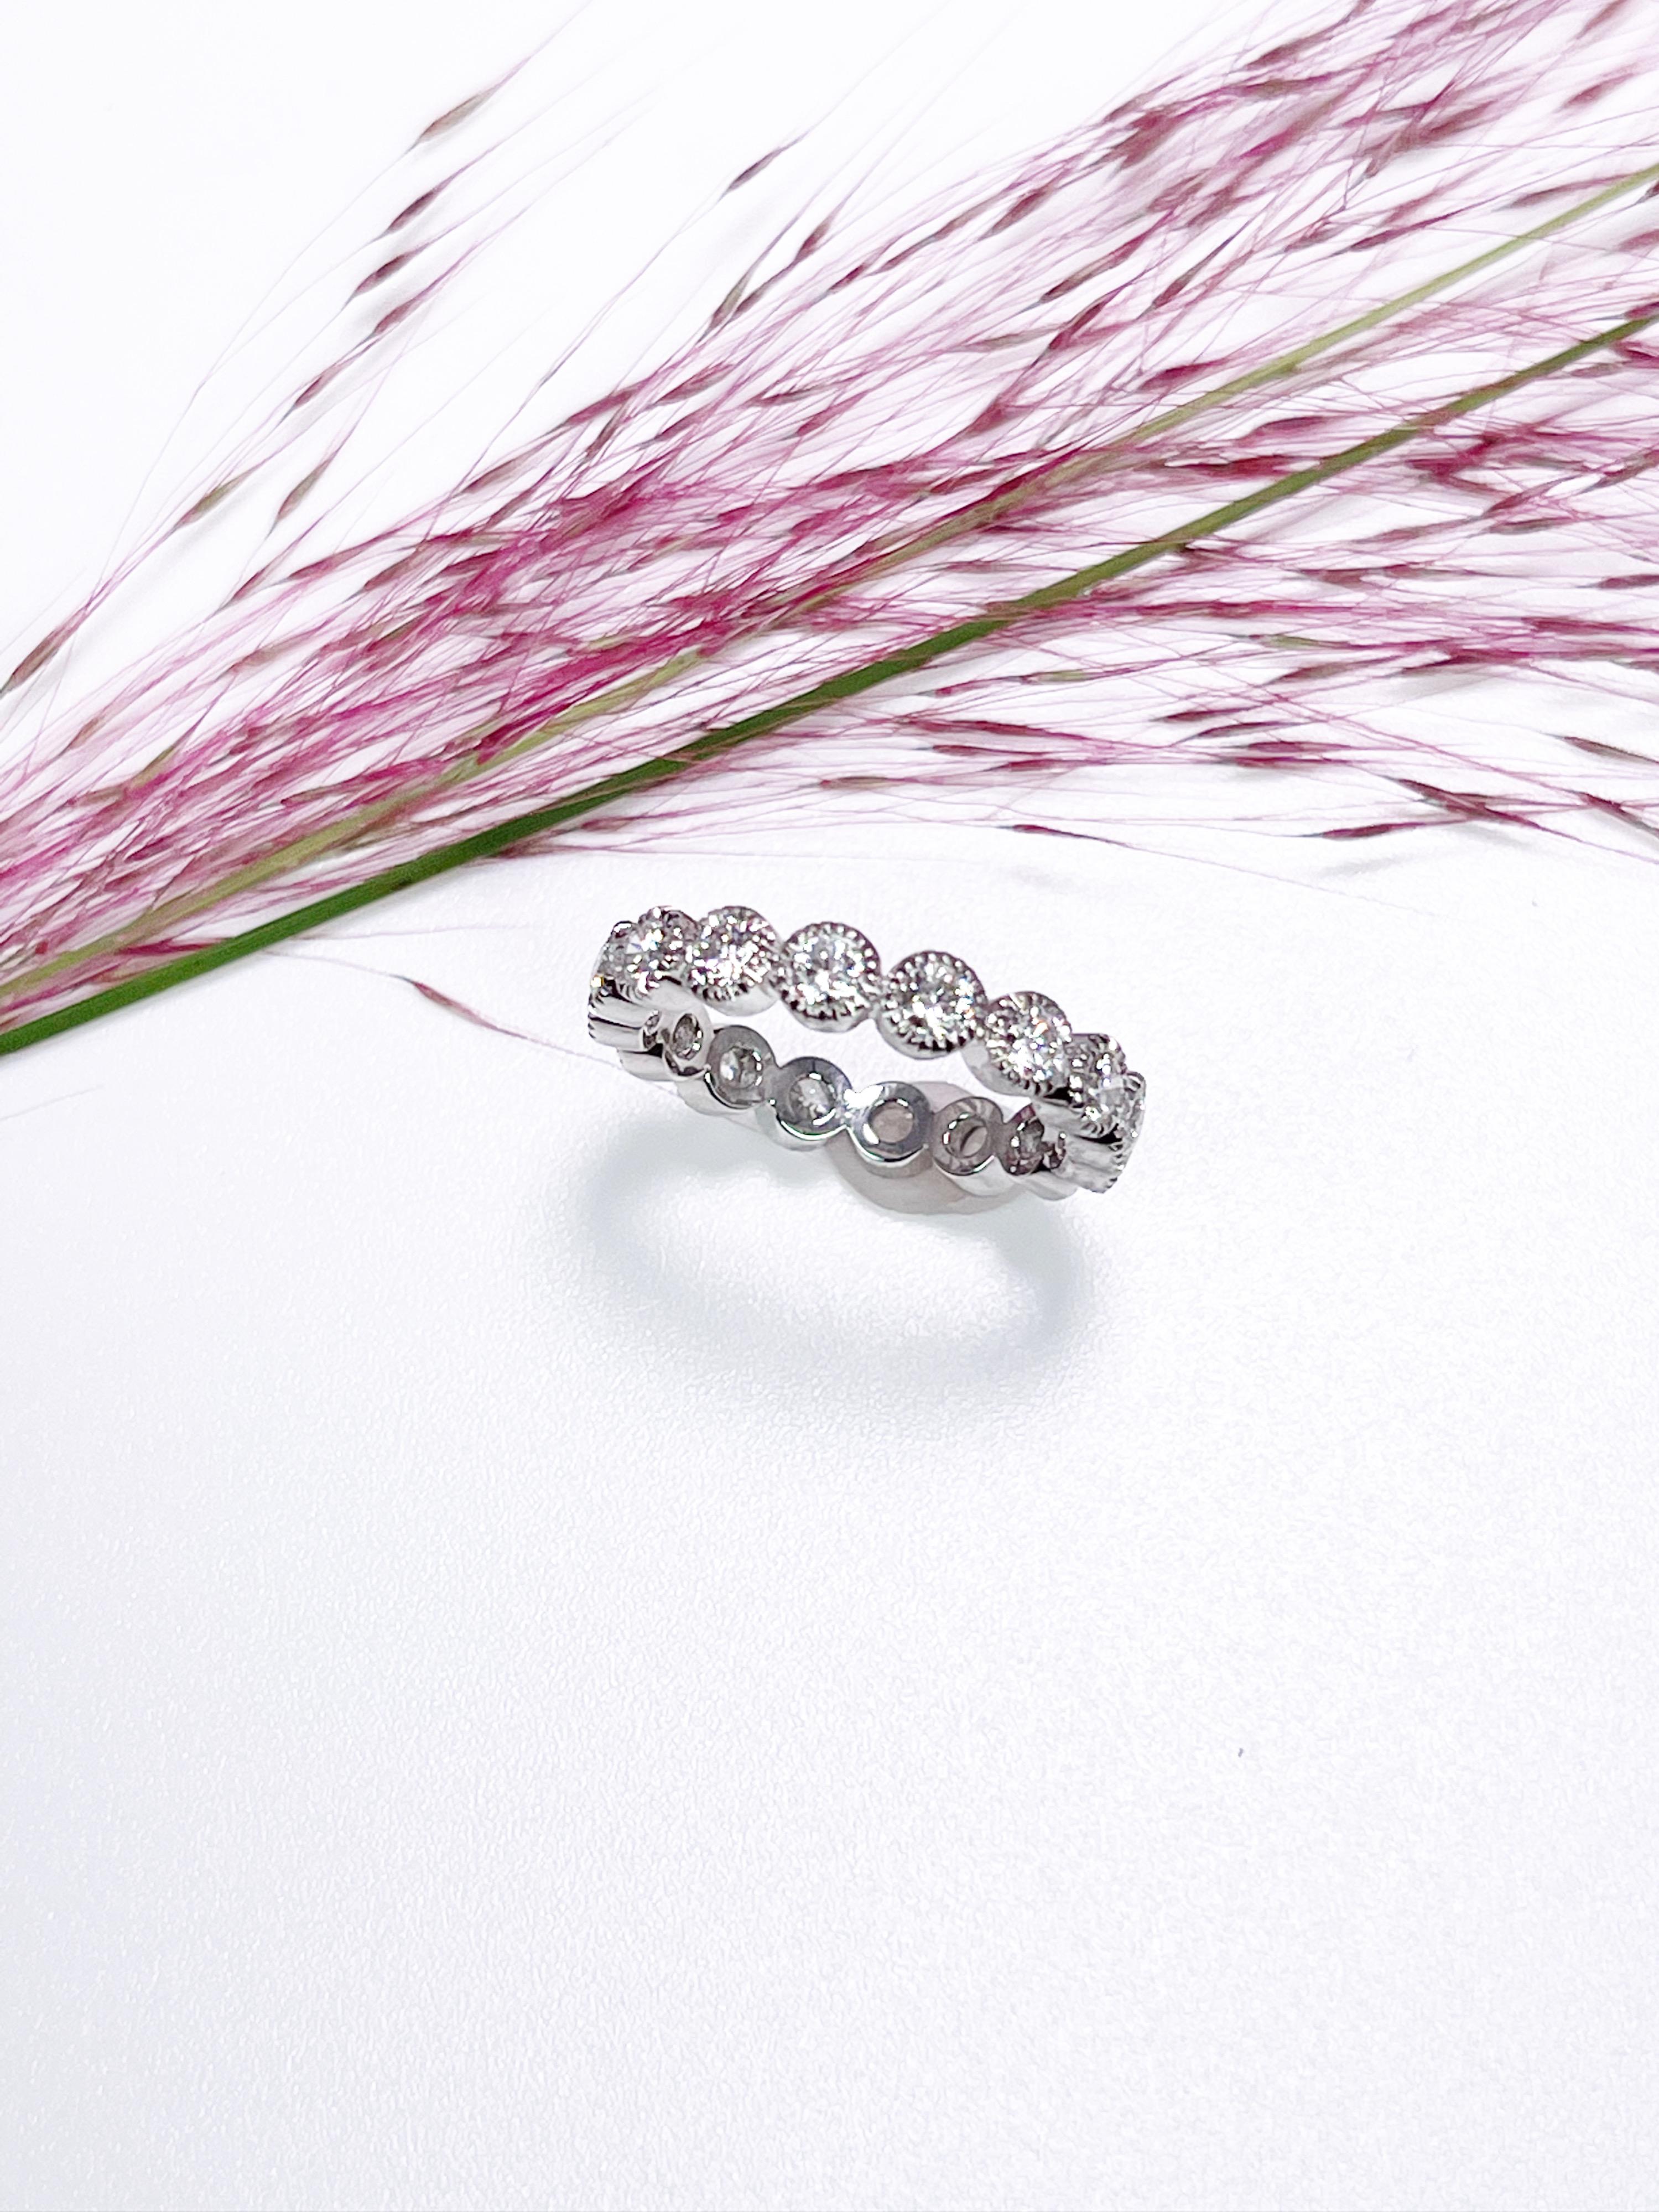 Diamond eternity ring made with round diamonds in platinum. The ring has hand engraving details around every diamond called milgrain.
GRAM WEIGHT: 4.71gr
METAL: platinum

NATURAL DIAMOND(S)
Cut: Round Brilliant
Color: E-F 
Clarity: VS-SI 
Carat: